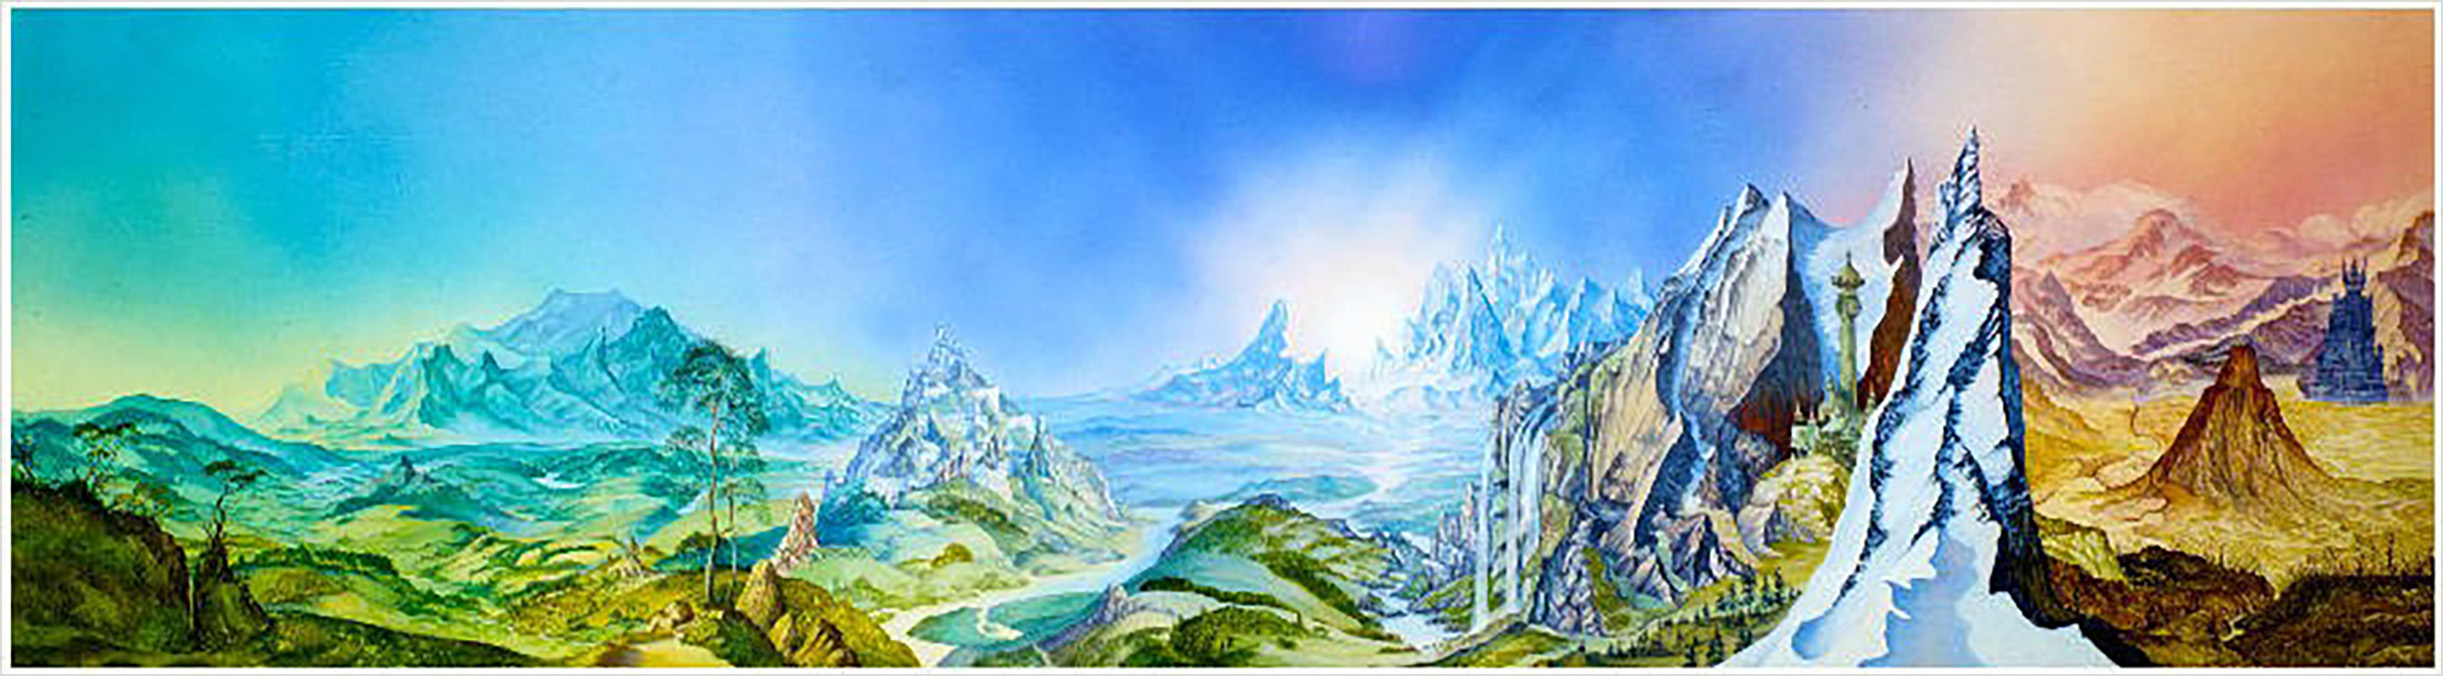 <titletext>

<strong>41. Tolkien Landscape</strong>

</titletext>

<br/><br/>

1983 oil on panel, image size 300 x 1080 mm. Artwork was commissioned for the trilogy book cover, Unwin Hyman, 1986.

<br/><br/>

The original oil painting is on permanent exhibition at Lakeside Gallery.<span class="ngViews">10 views</span>